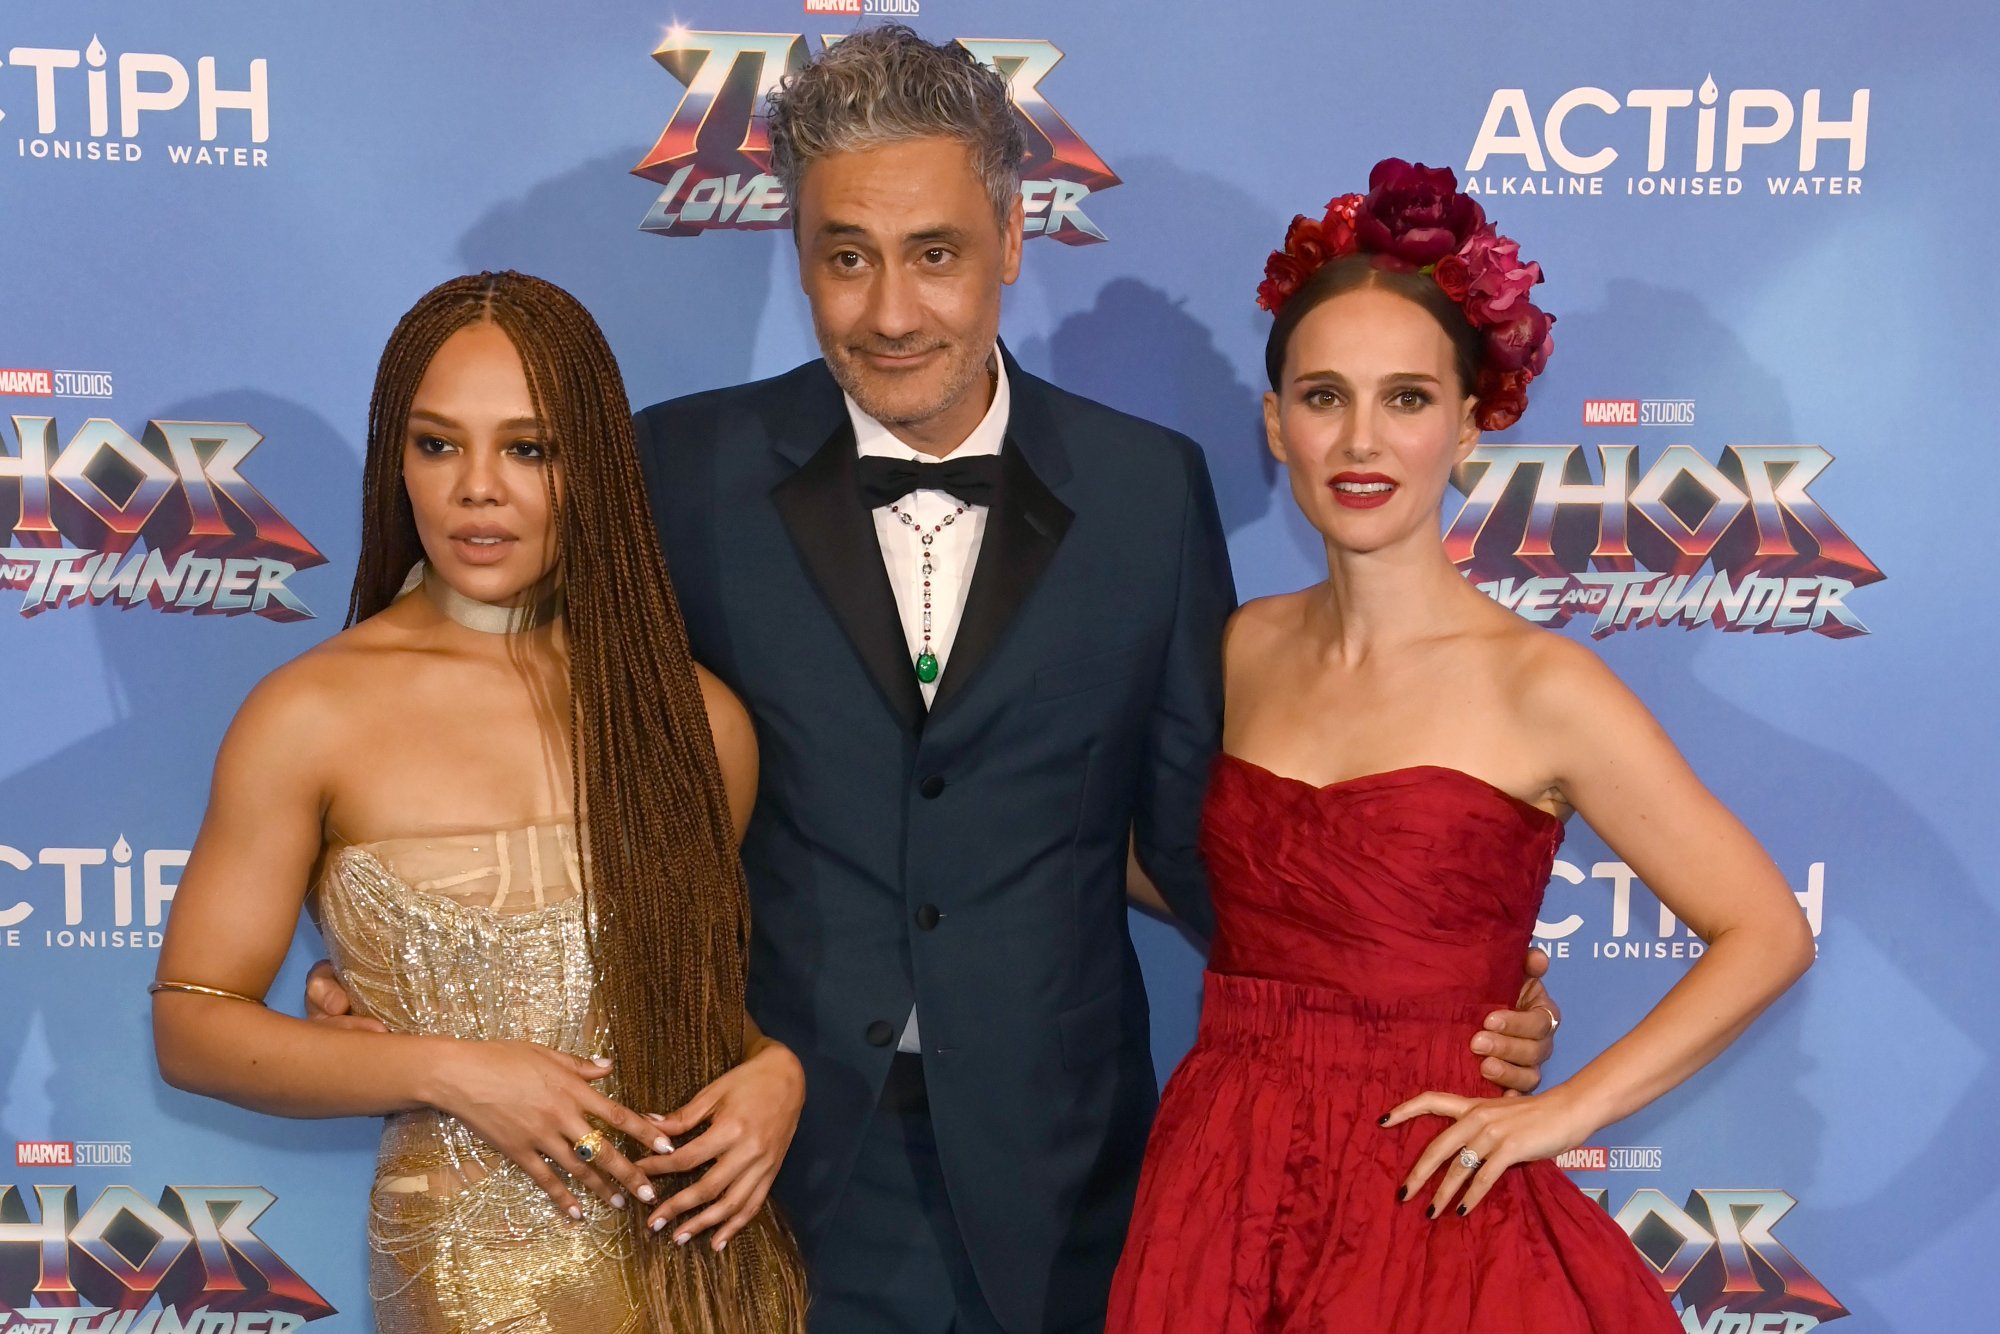 'Thor: Love and Thunder' Tessa Thompson, Taika Waititi, and Natalie Portman posing in front of a step and repeat for the movie. Thompson and Portman wear dresses and Waititi wears a tux.